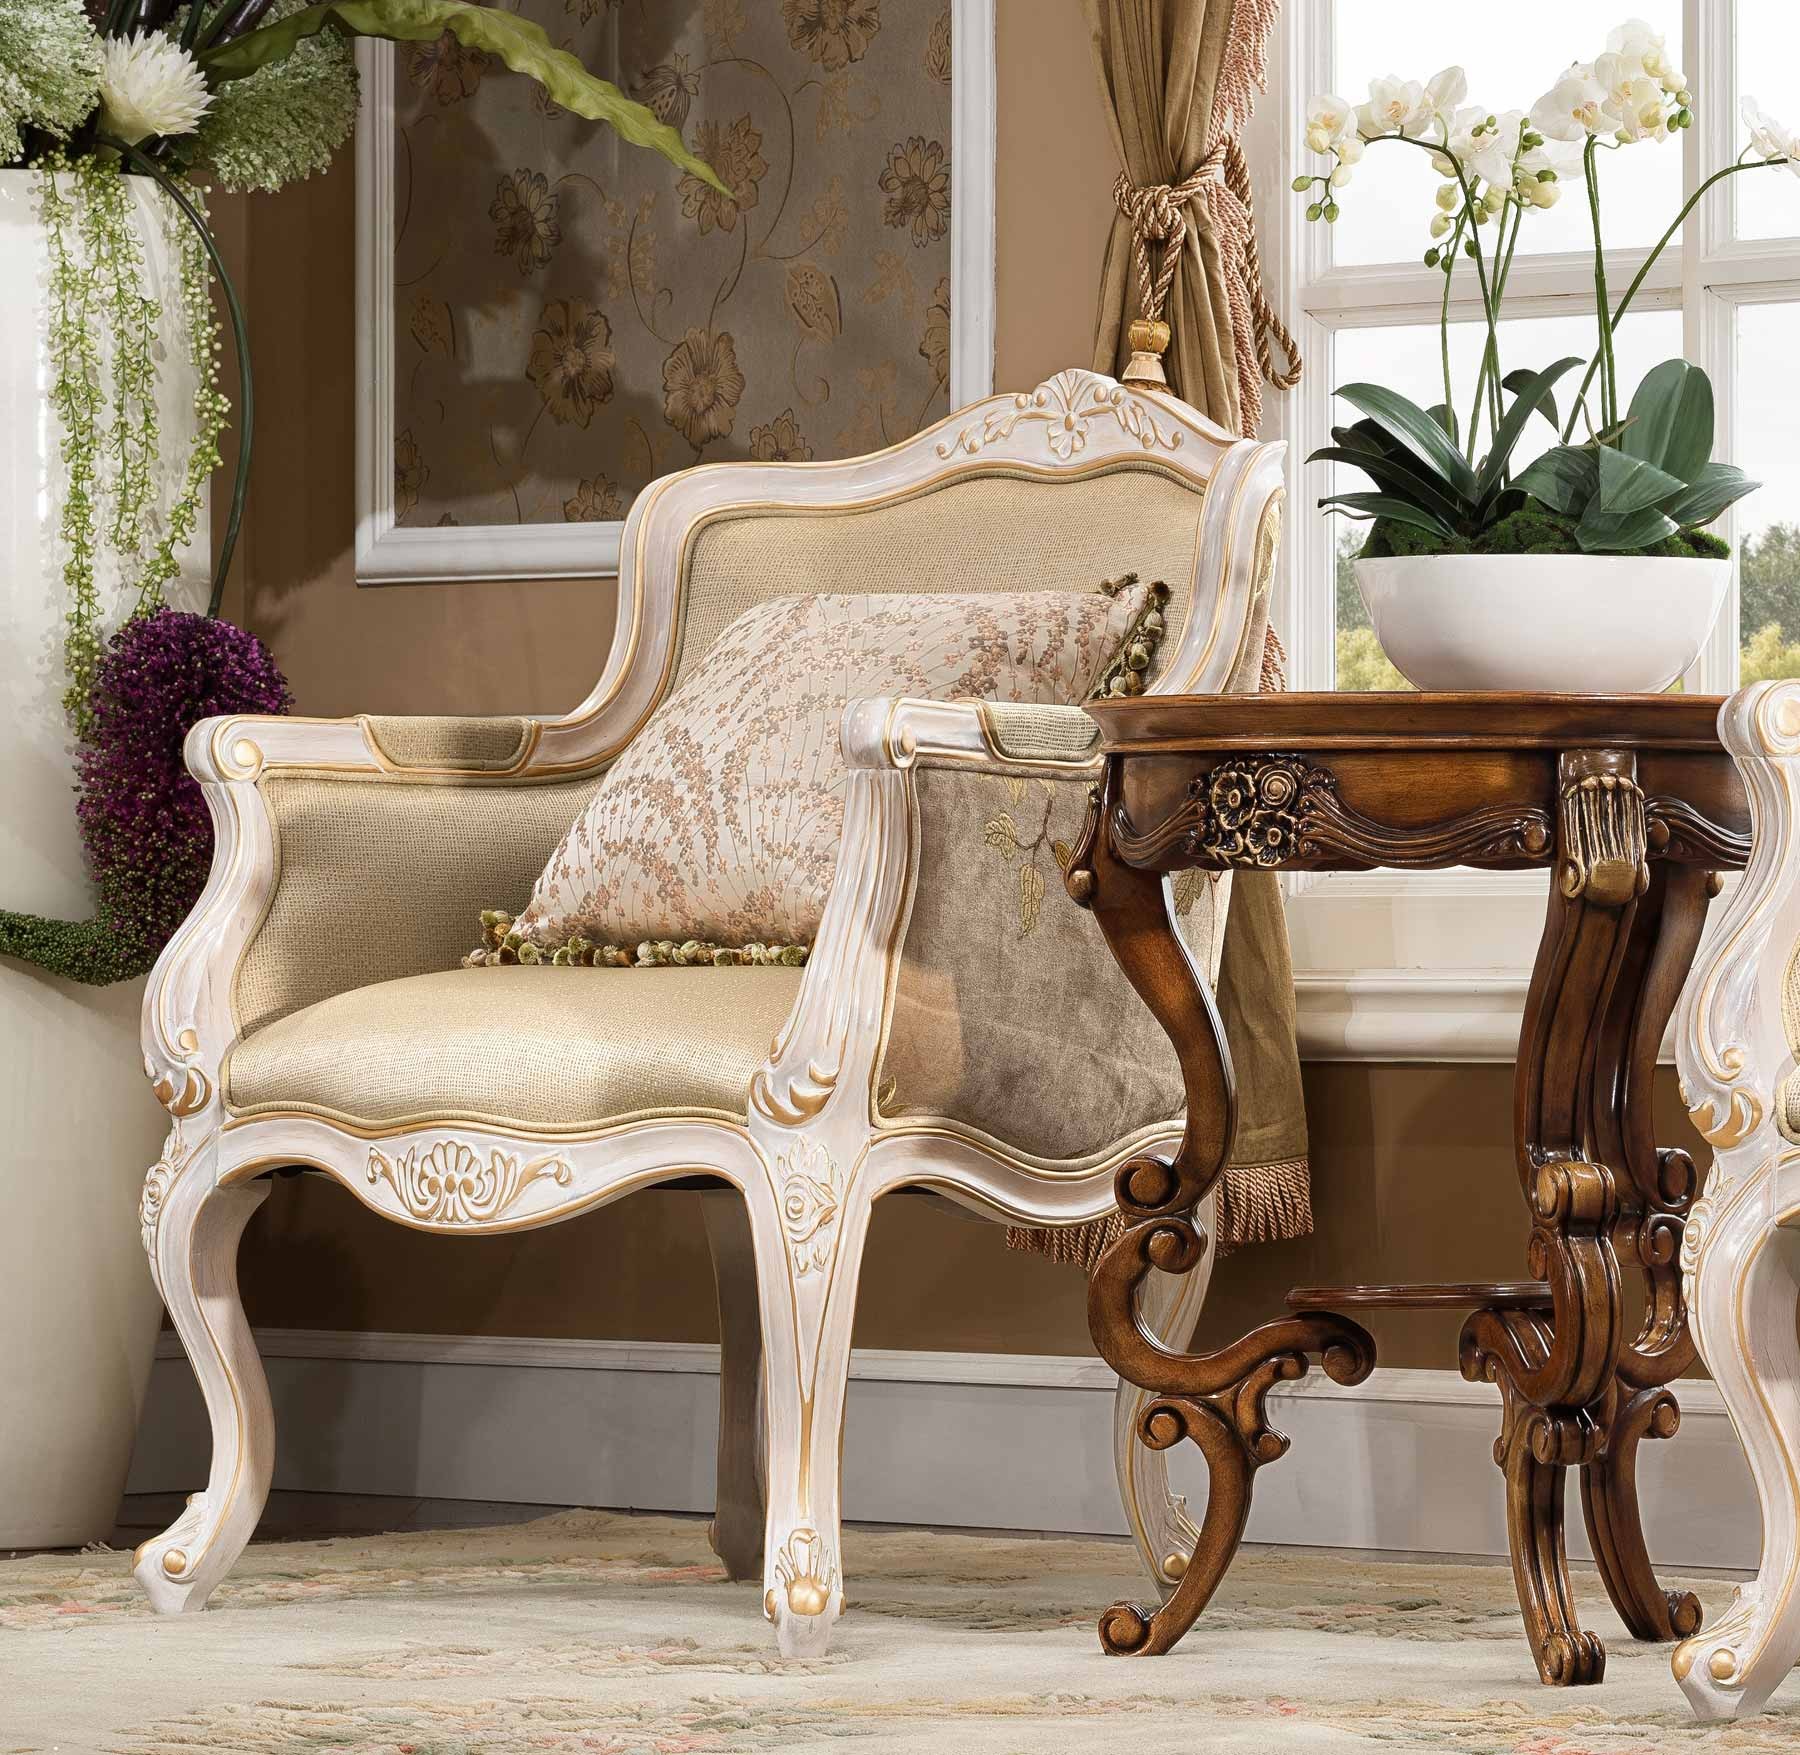 Moreton Chair shown in Antique Almond finish